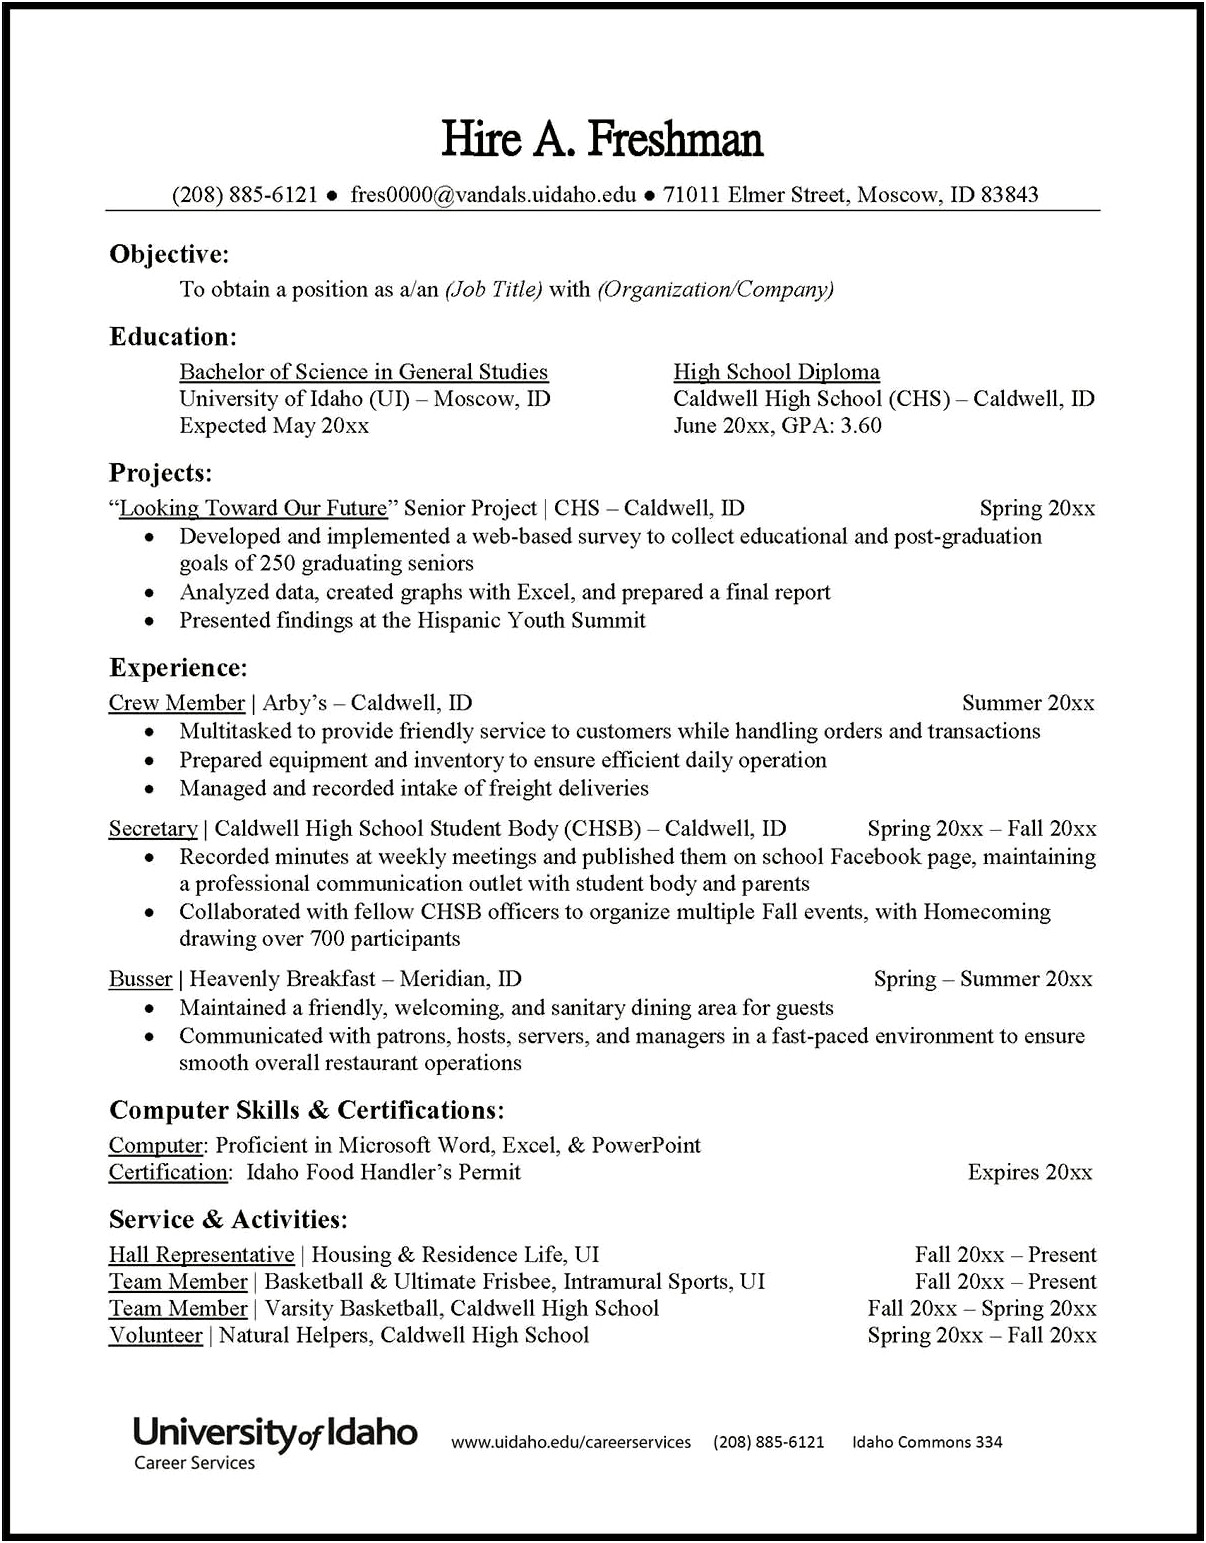 Resume Tips For Computer Skills